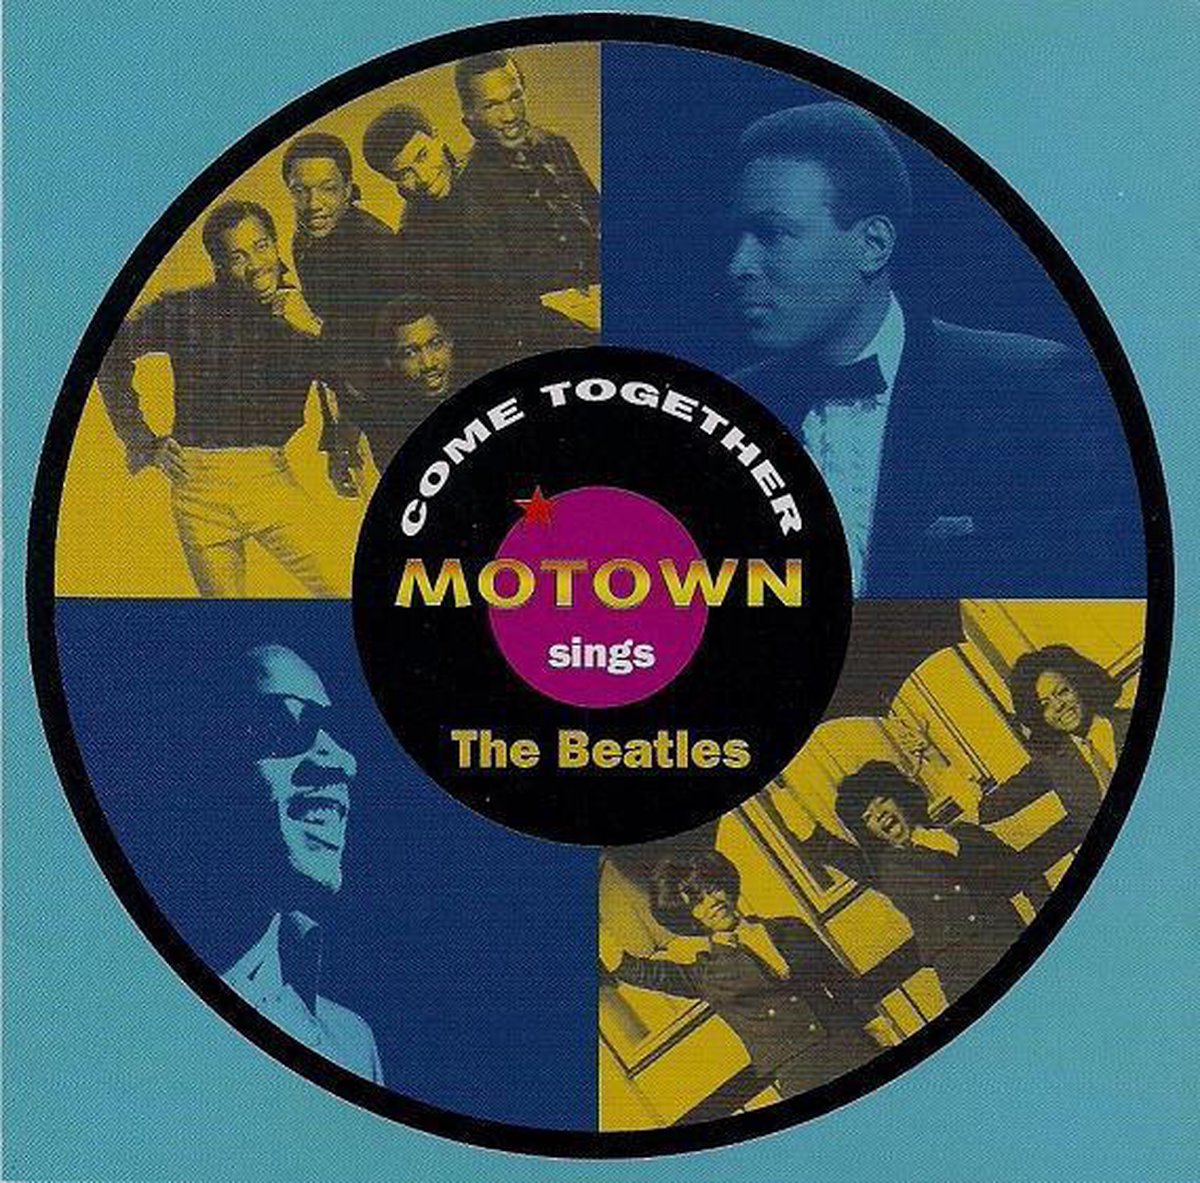 Come Together: Motown Sings the Beatles - various artists